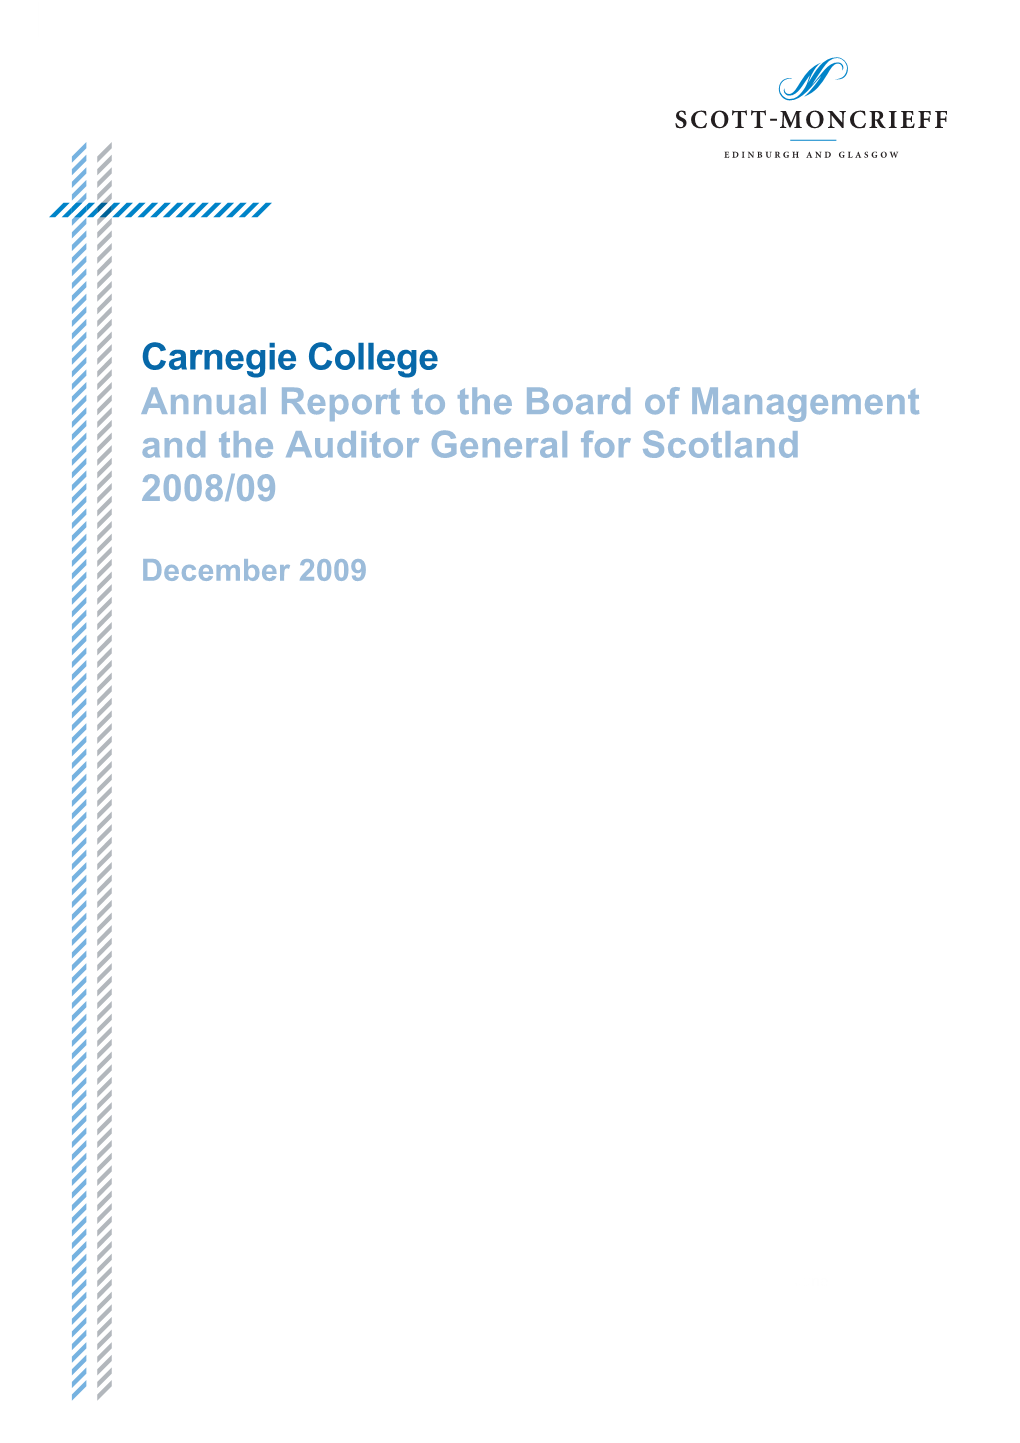 Carnegie College Annual Report to the Board of Management and the Auditor General for Scotland 2008/09